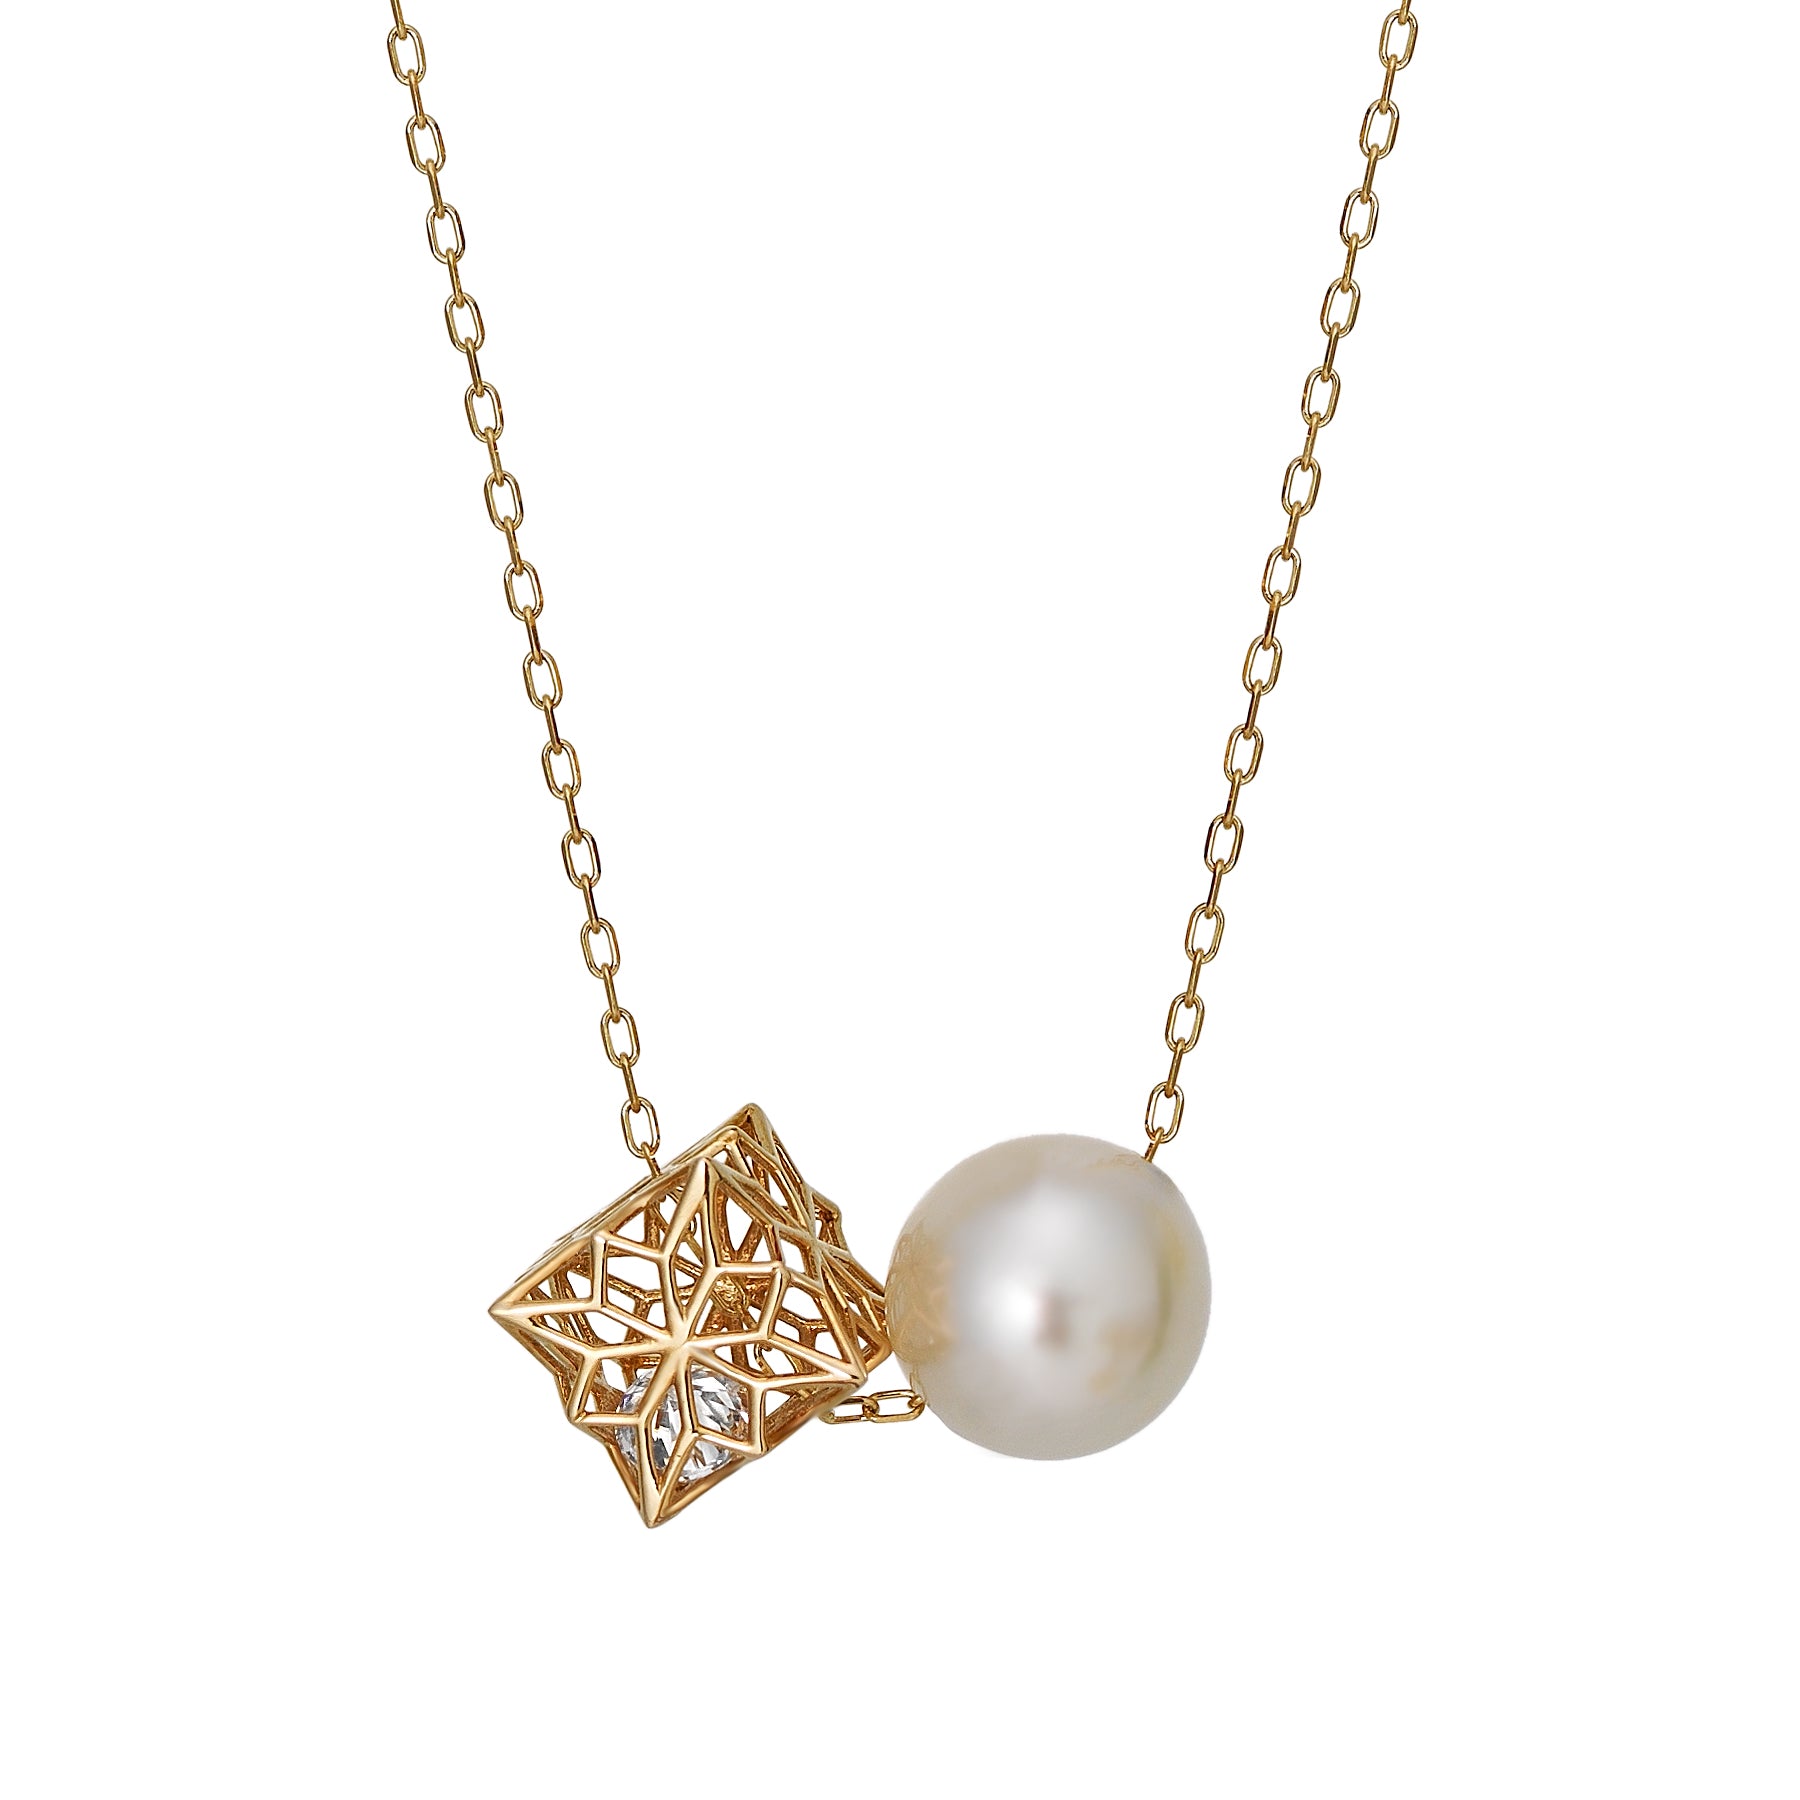 [Pannier] 10K Yellow Gold Pearl & Cube Necklace - Product Image